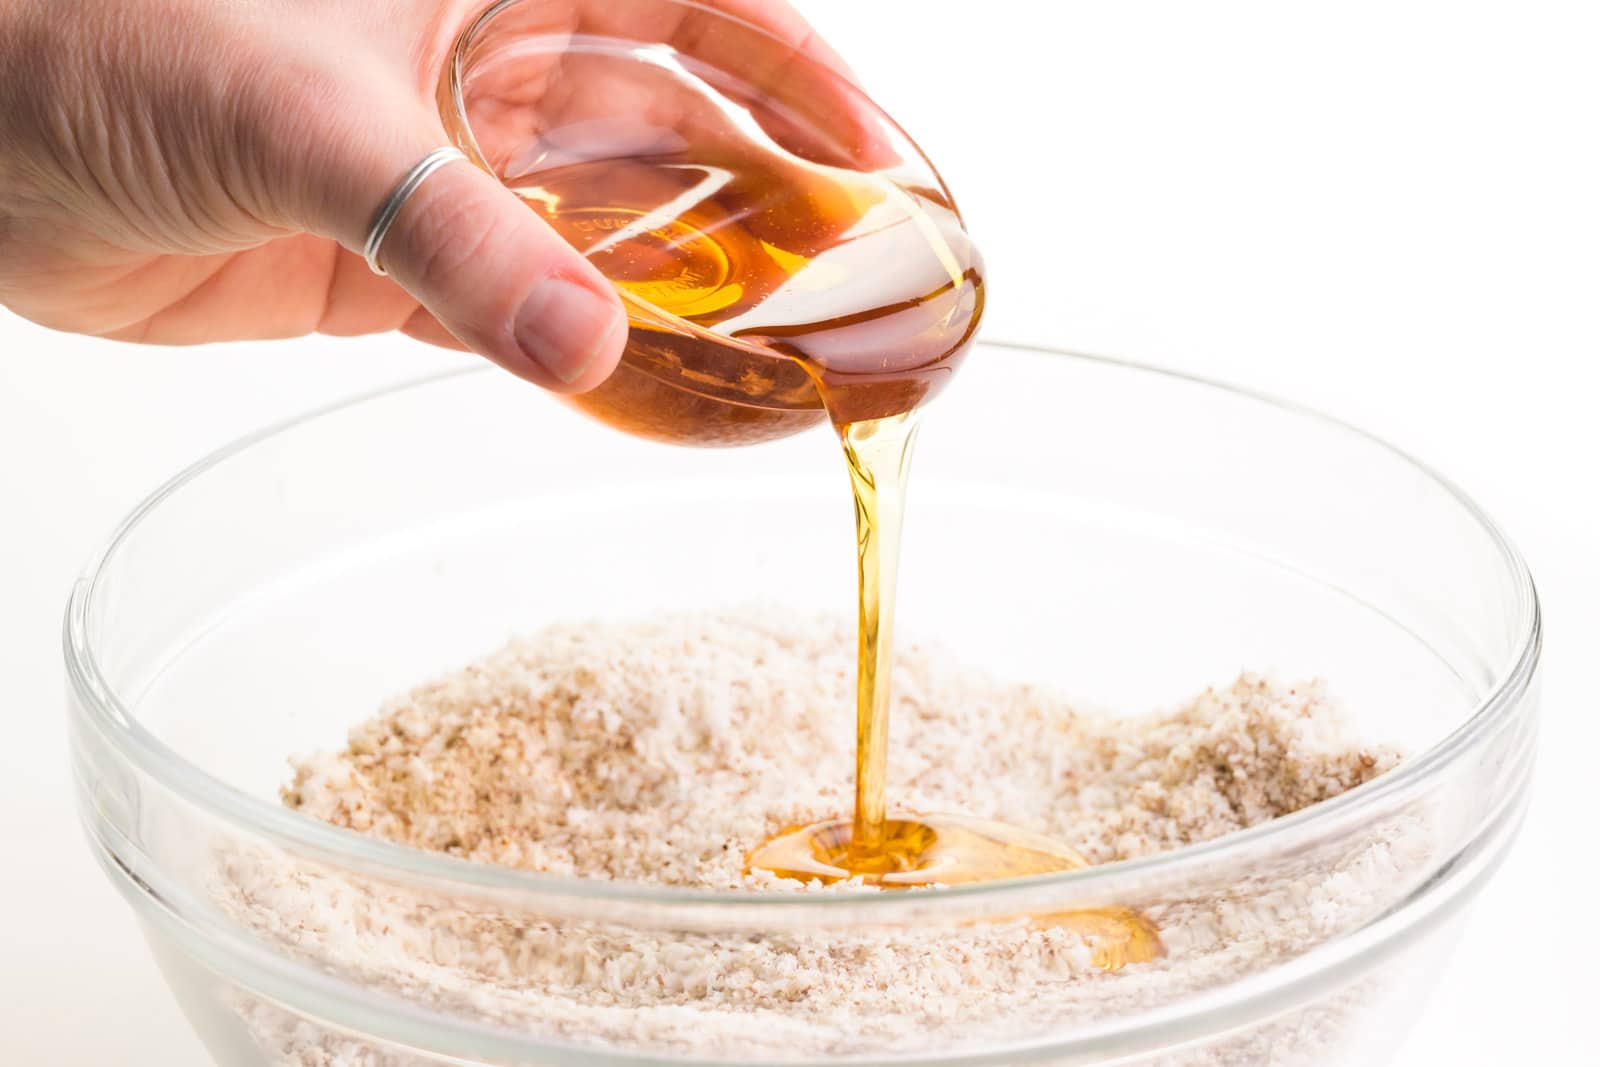 A hand holds a small bowl of syrup, pouring it into another bowl full of a coconut mixture.